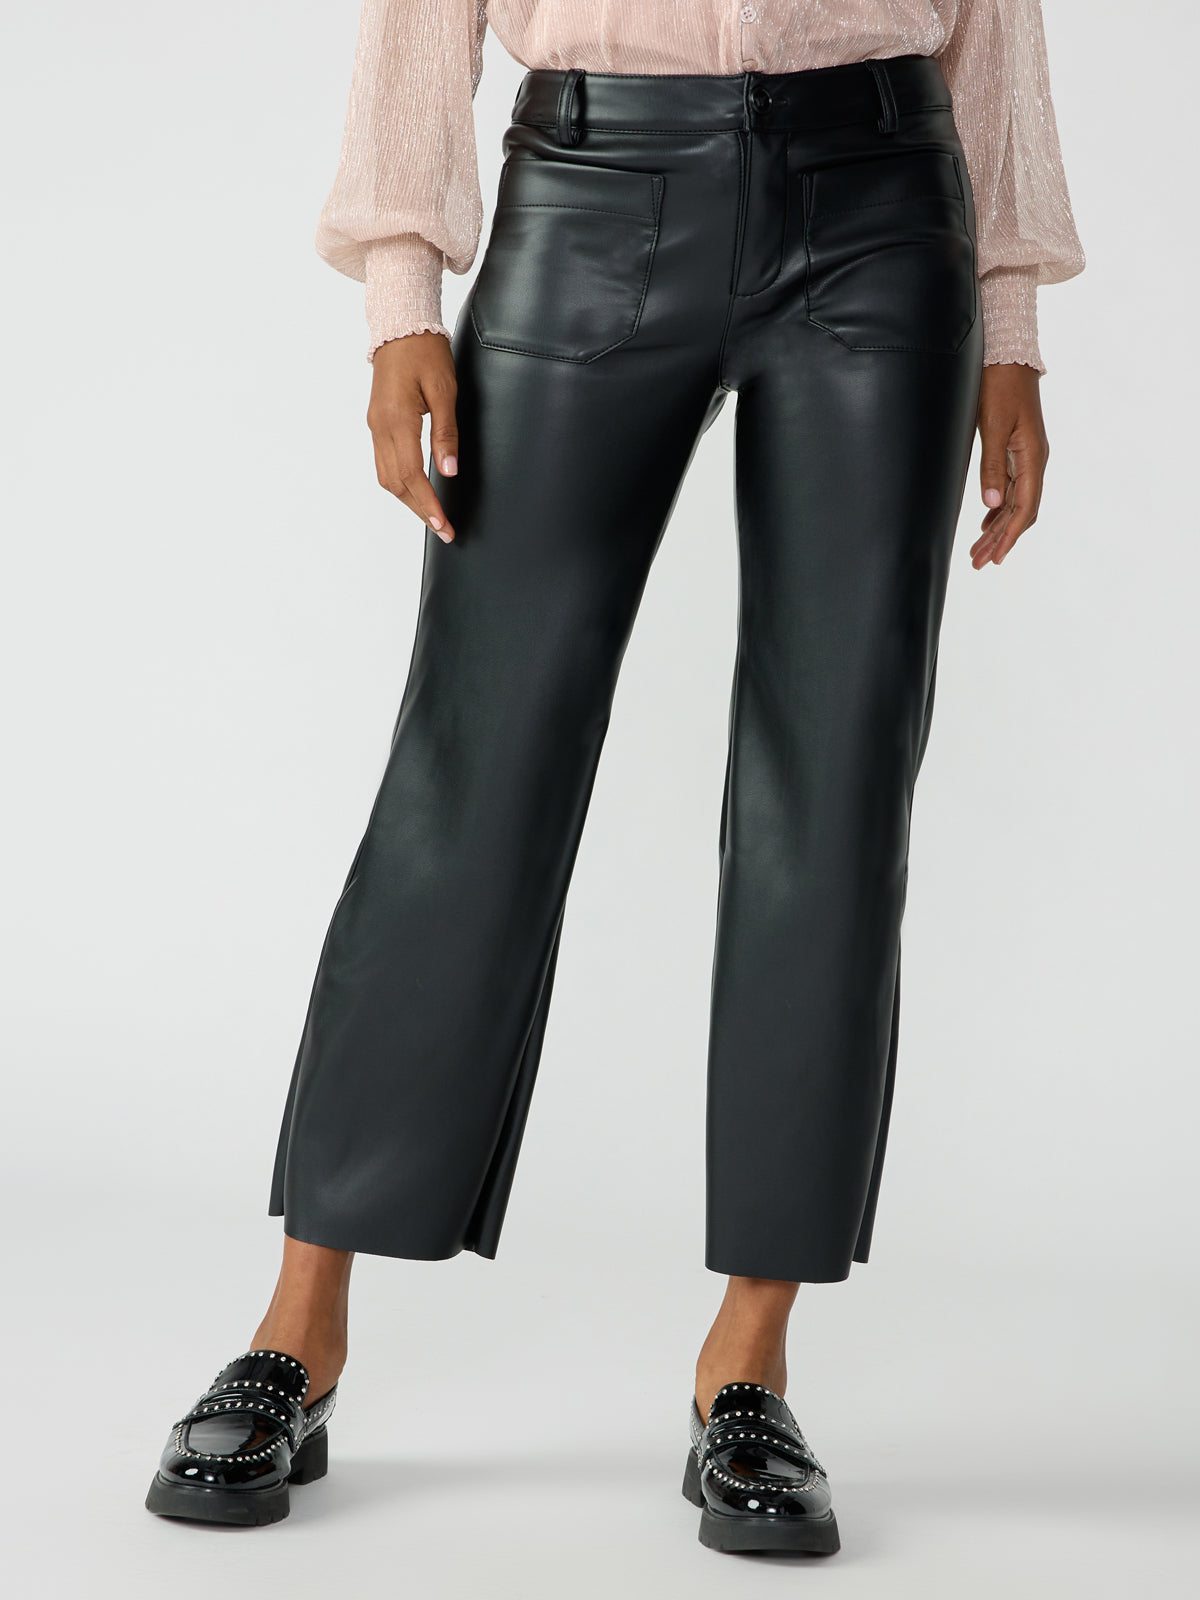 The Marine Standard Rise Leather Crop Trouser Pant Black